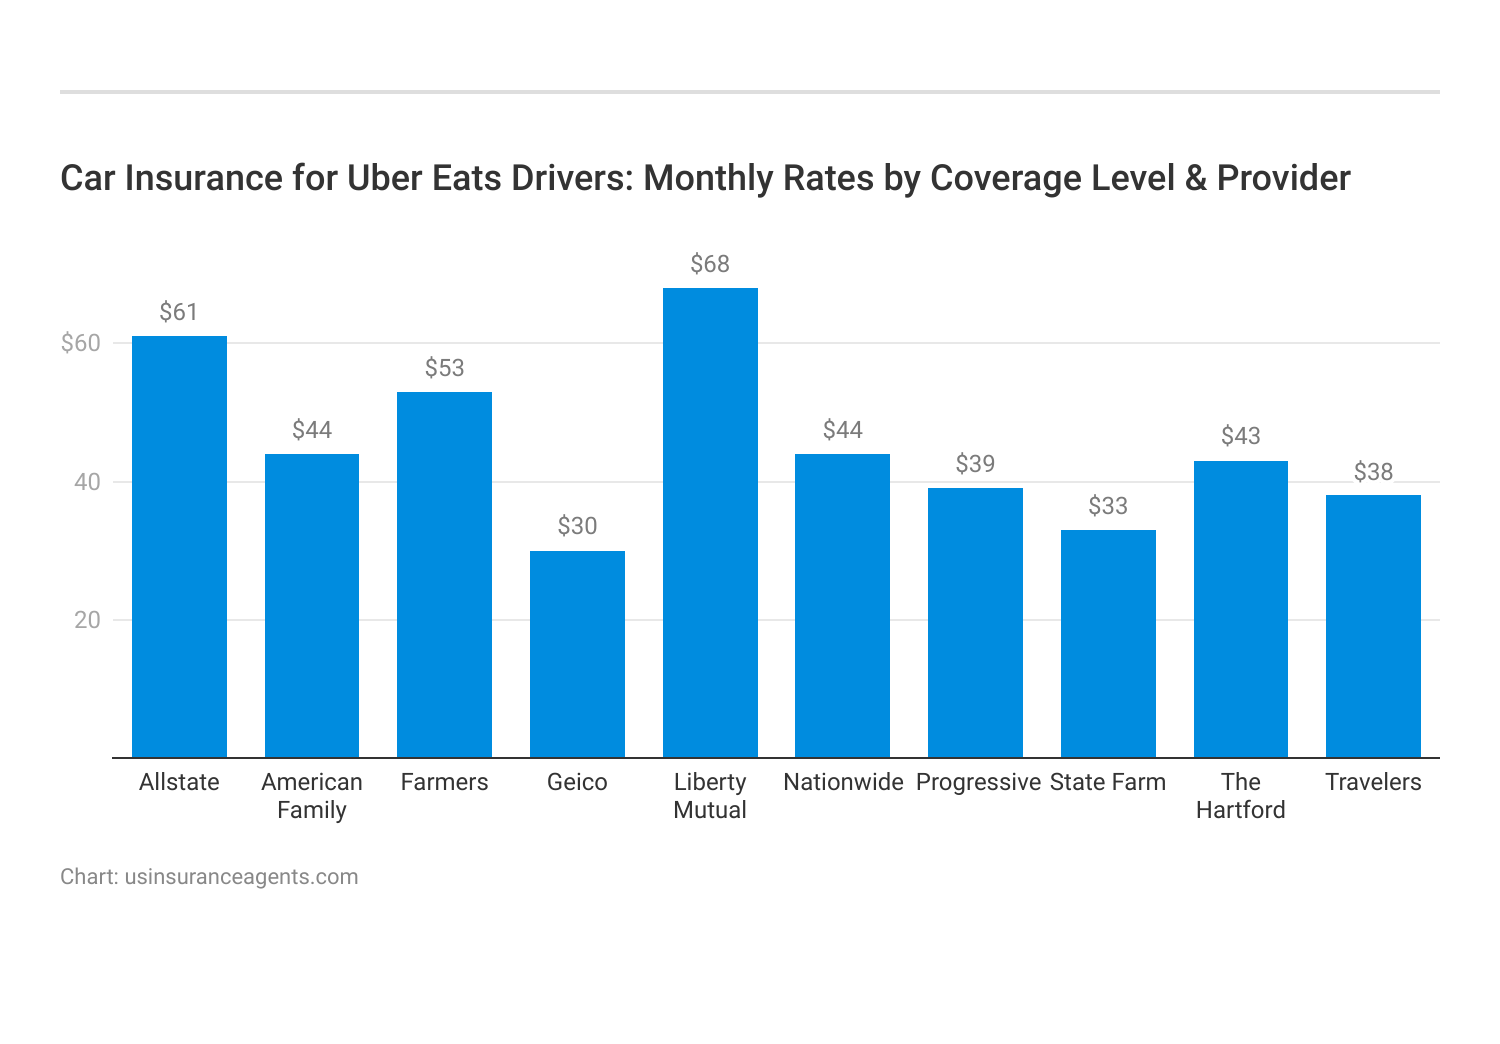 <h3>Car Insurance for Uber Eats Drivers: Monthly Rates by Coverage Level & Provider</h3>